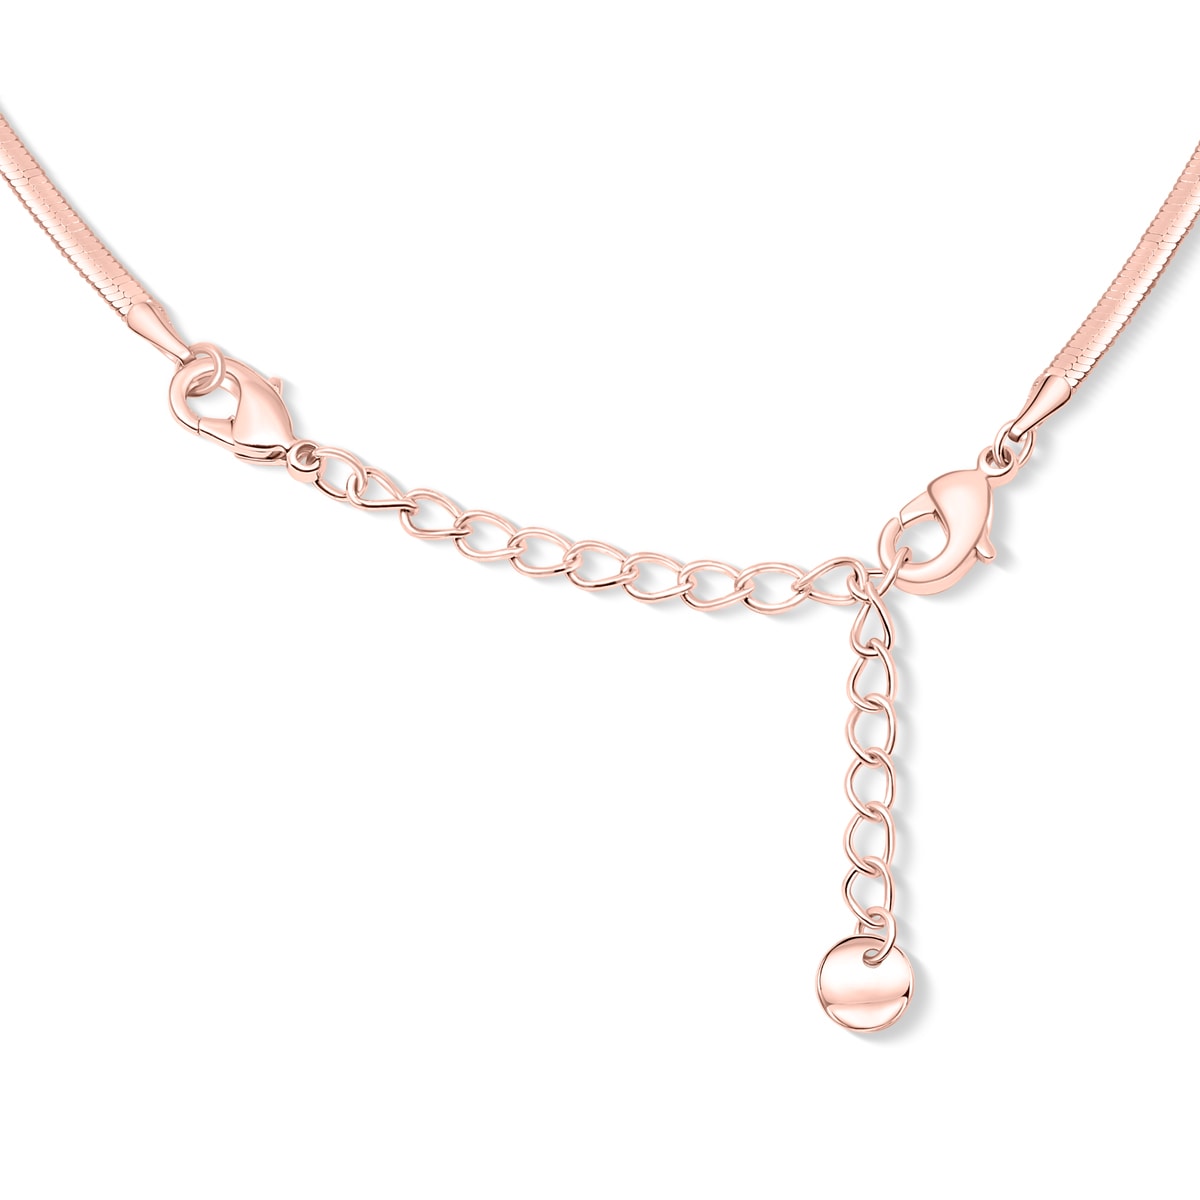 10k Rose Gold Kennedy Necklace – By Invite Only